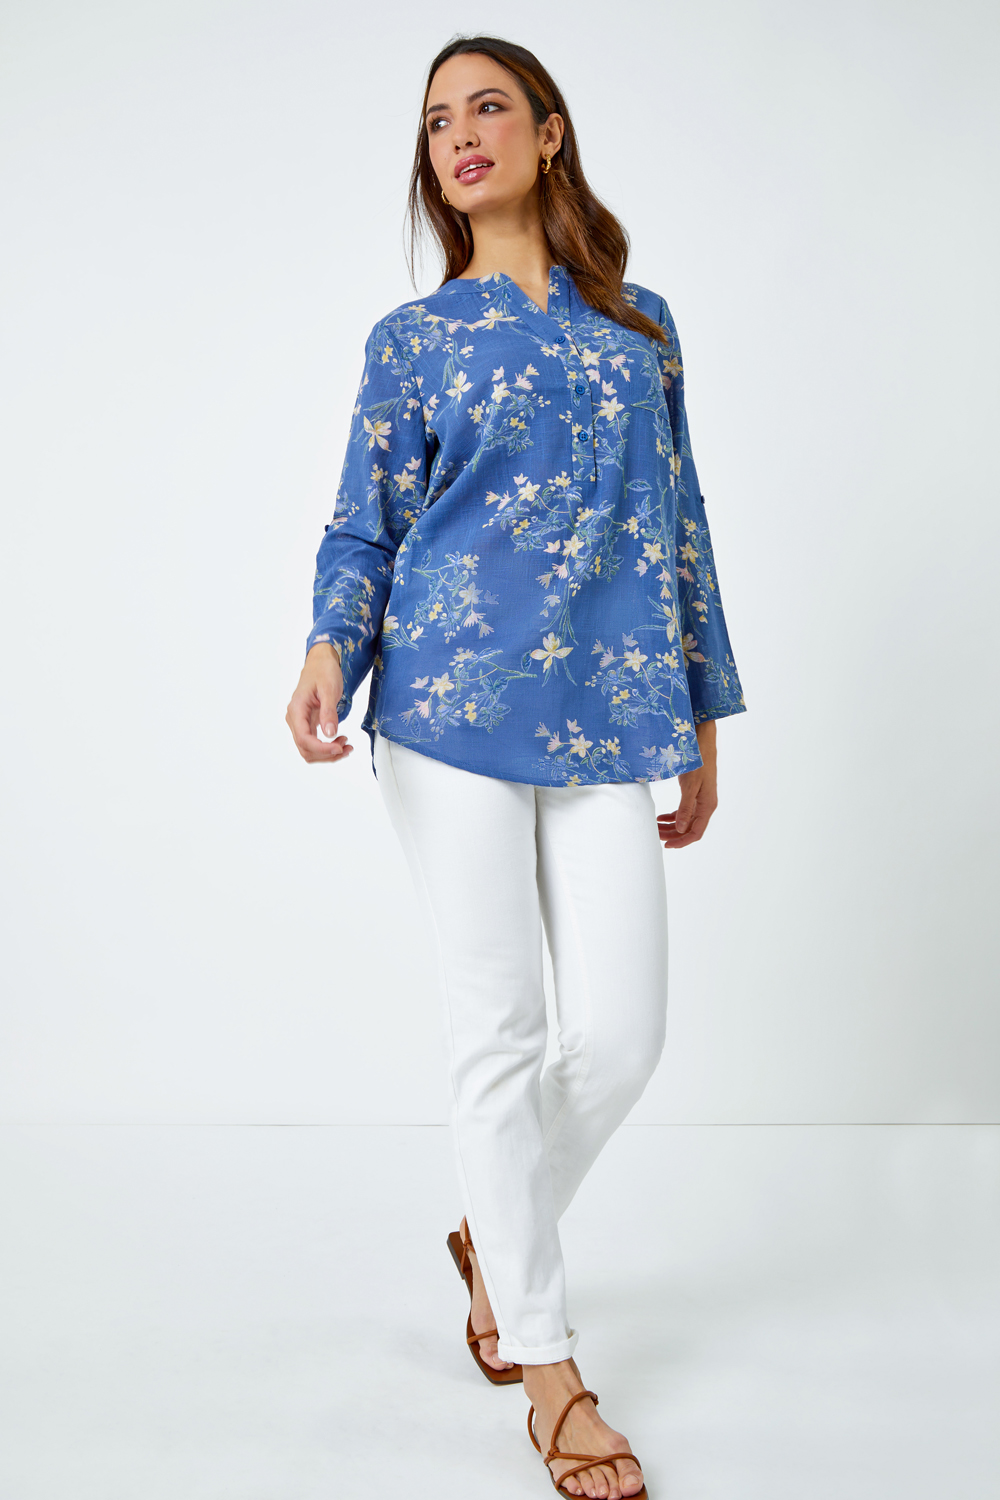 Blue Cotton Floral Print Overshirt, Image 2 of 5